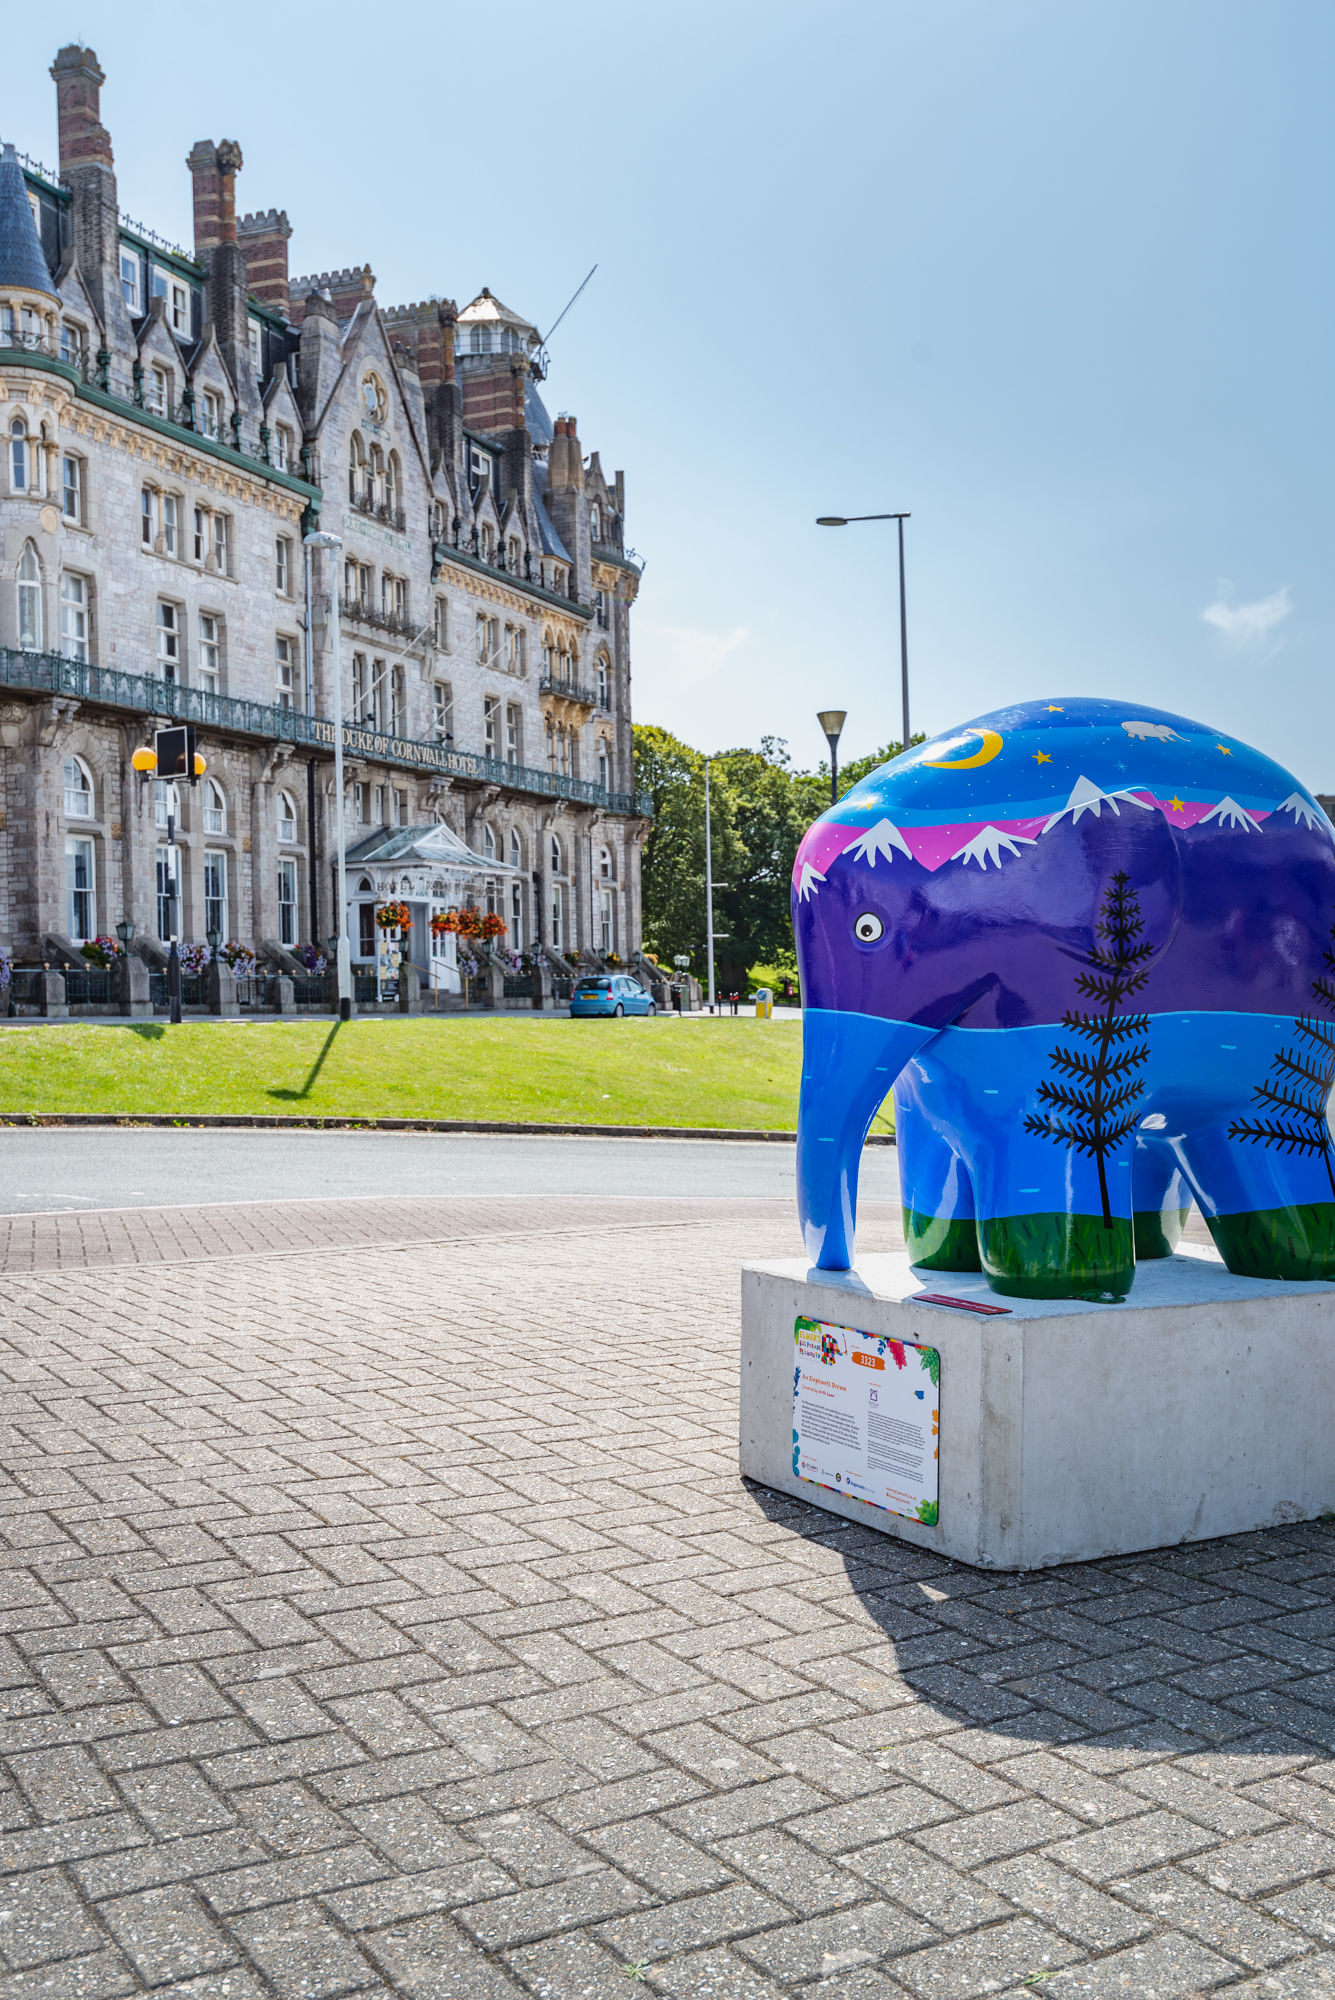 'An Elephant's Dream' by Arth Law. Sponsored by McClure Solicitors - Image 6 of 10